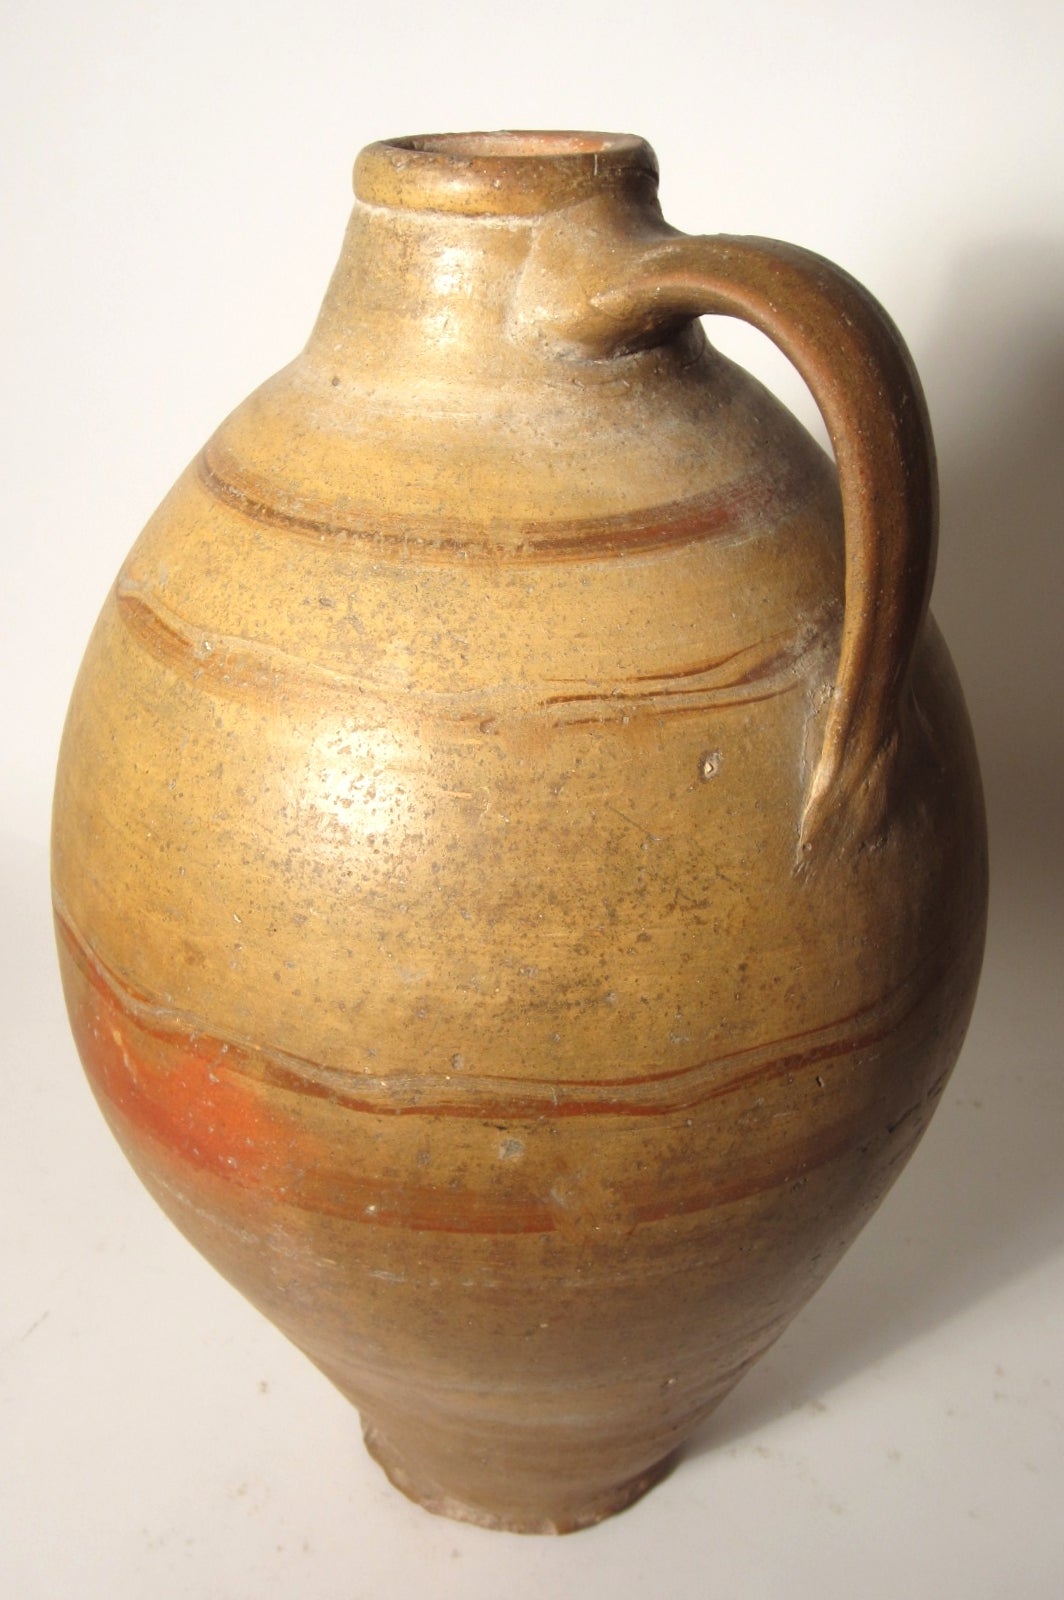 Incredible pair of large terracotta oil jugs in a polished finish.
We're not experts in this field but these look to be ancient(B.C.)clay pieces.
Perfect as interior decor, they have a wonderful soulful color and patina.